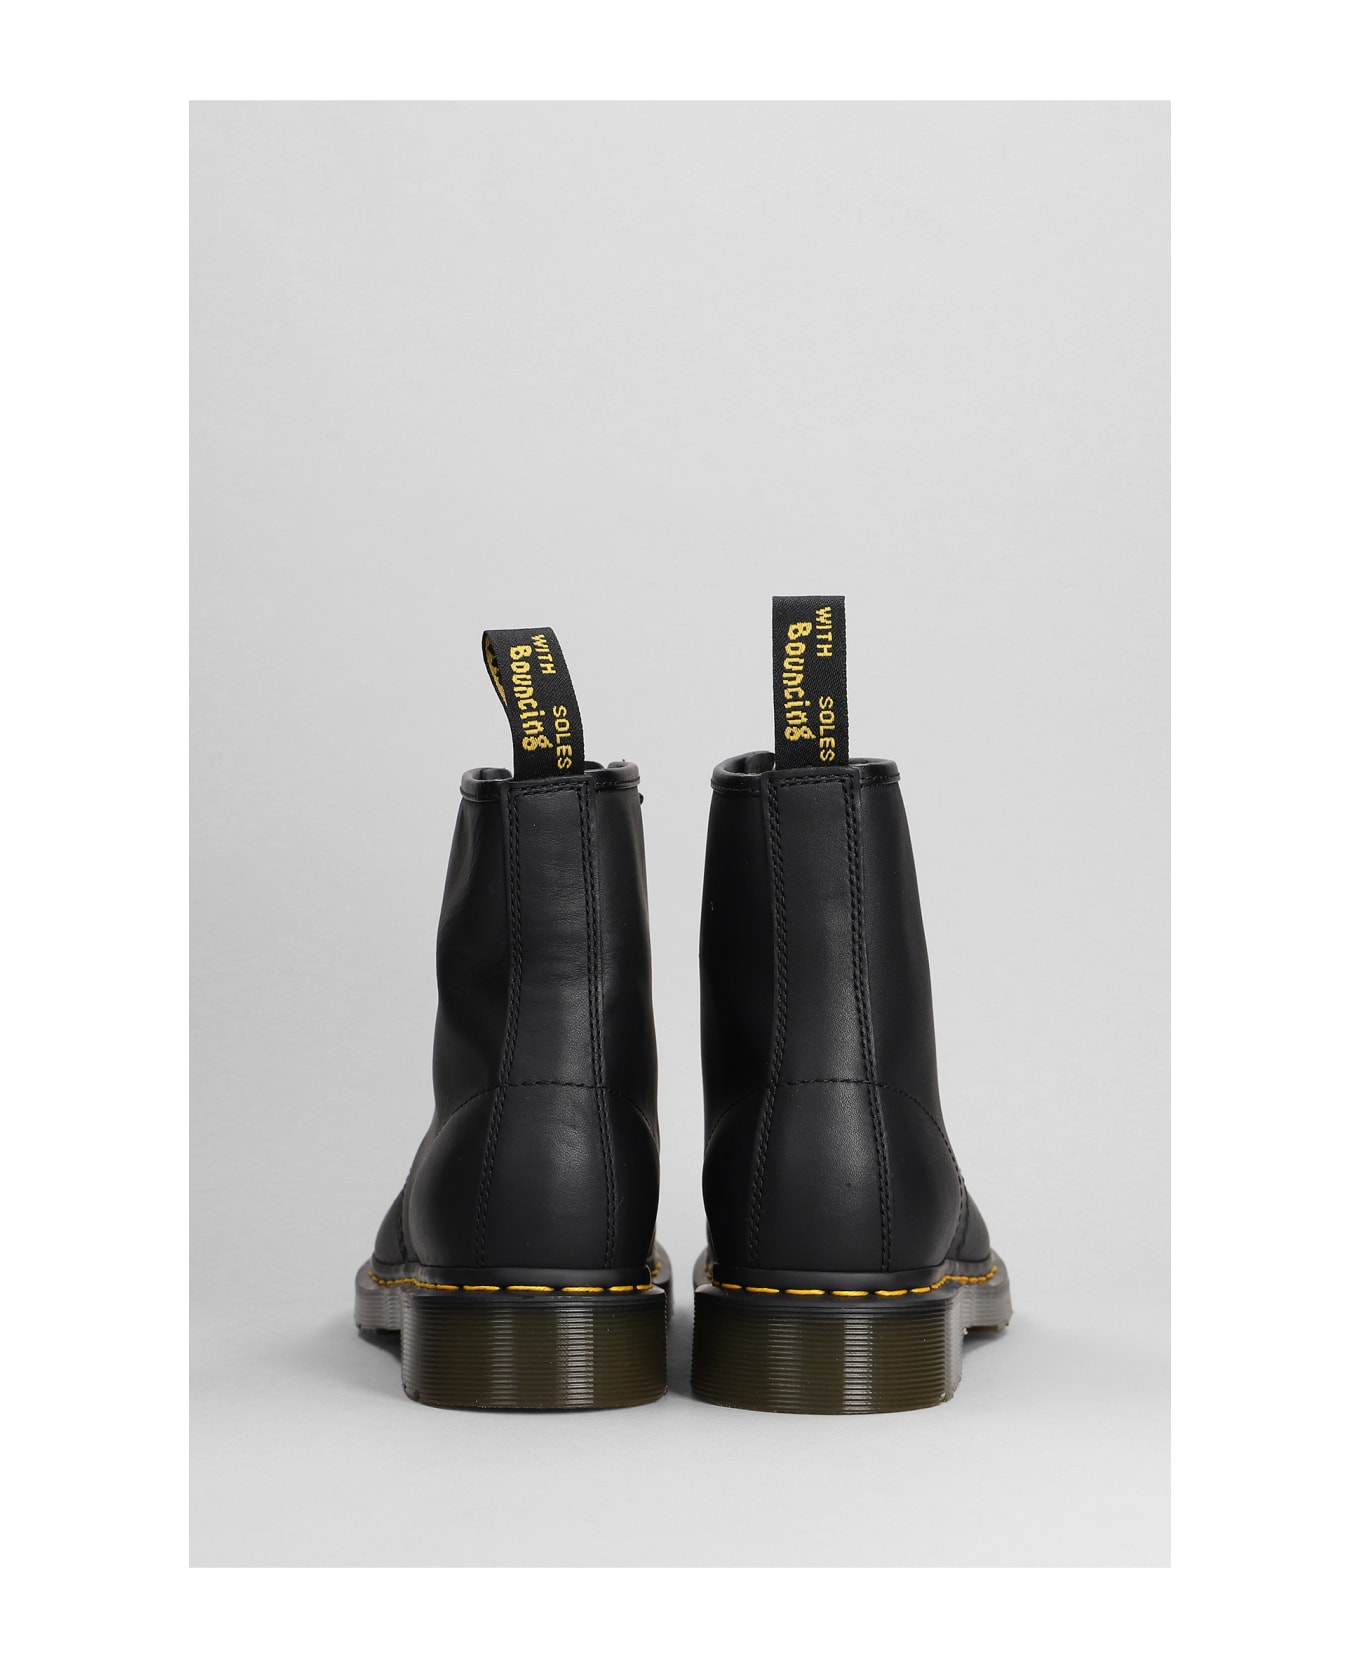 Dr. Martens 1460 Greasy Combat Boots In Black Leather - black ブーツ